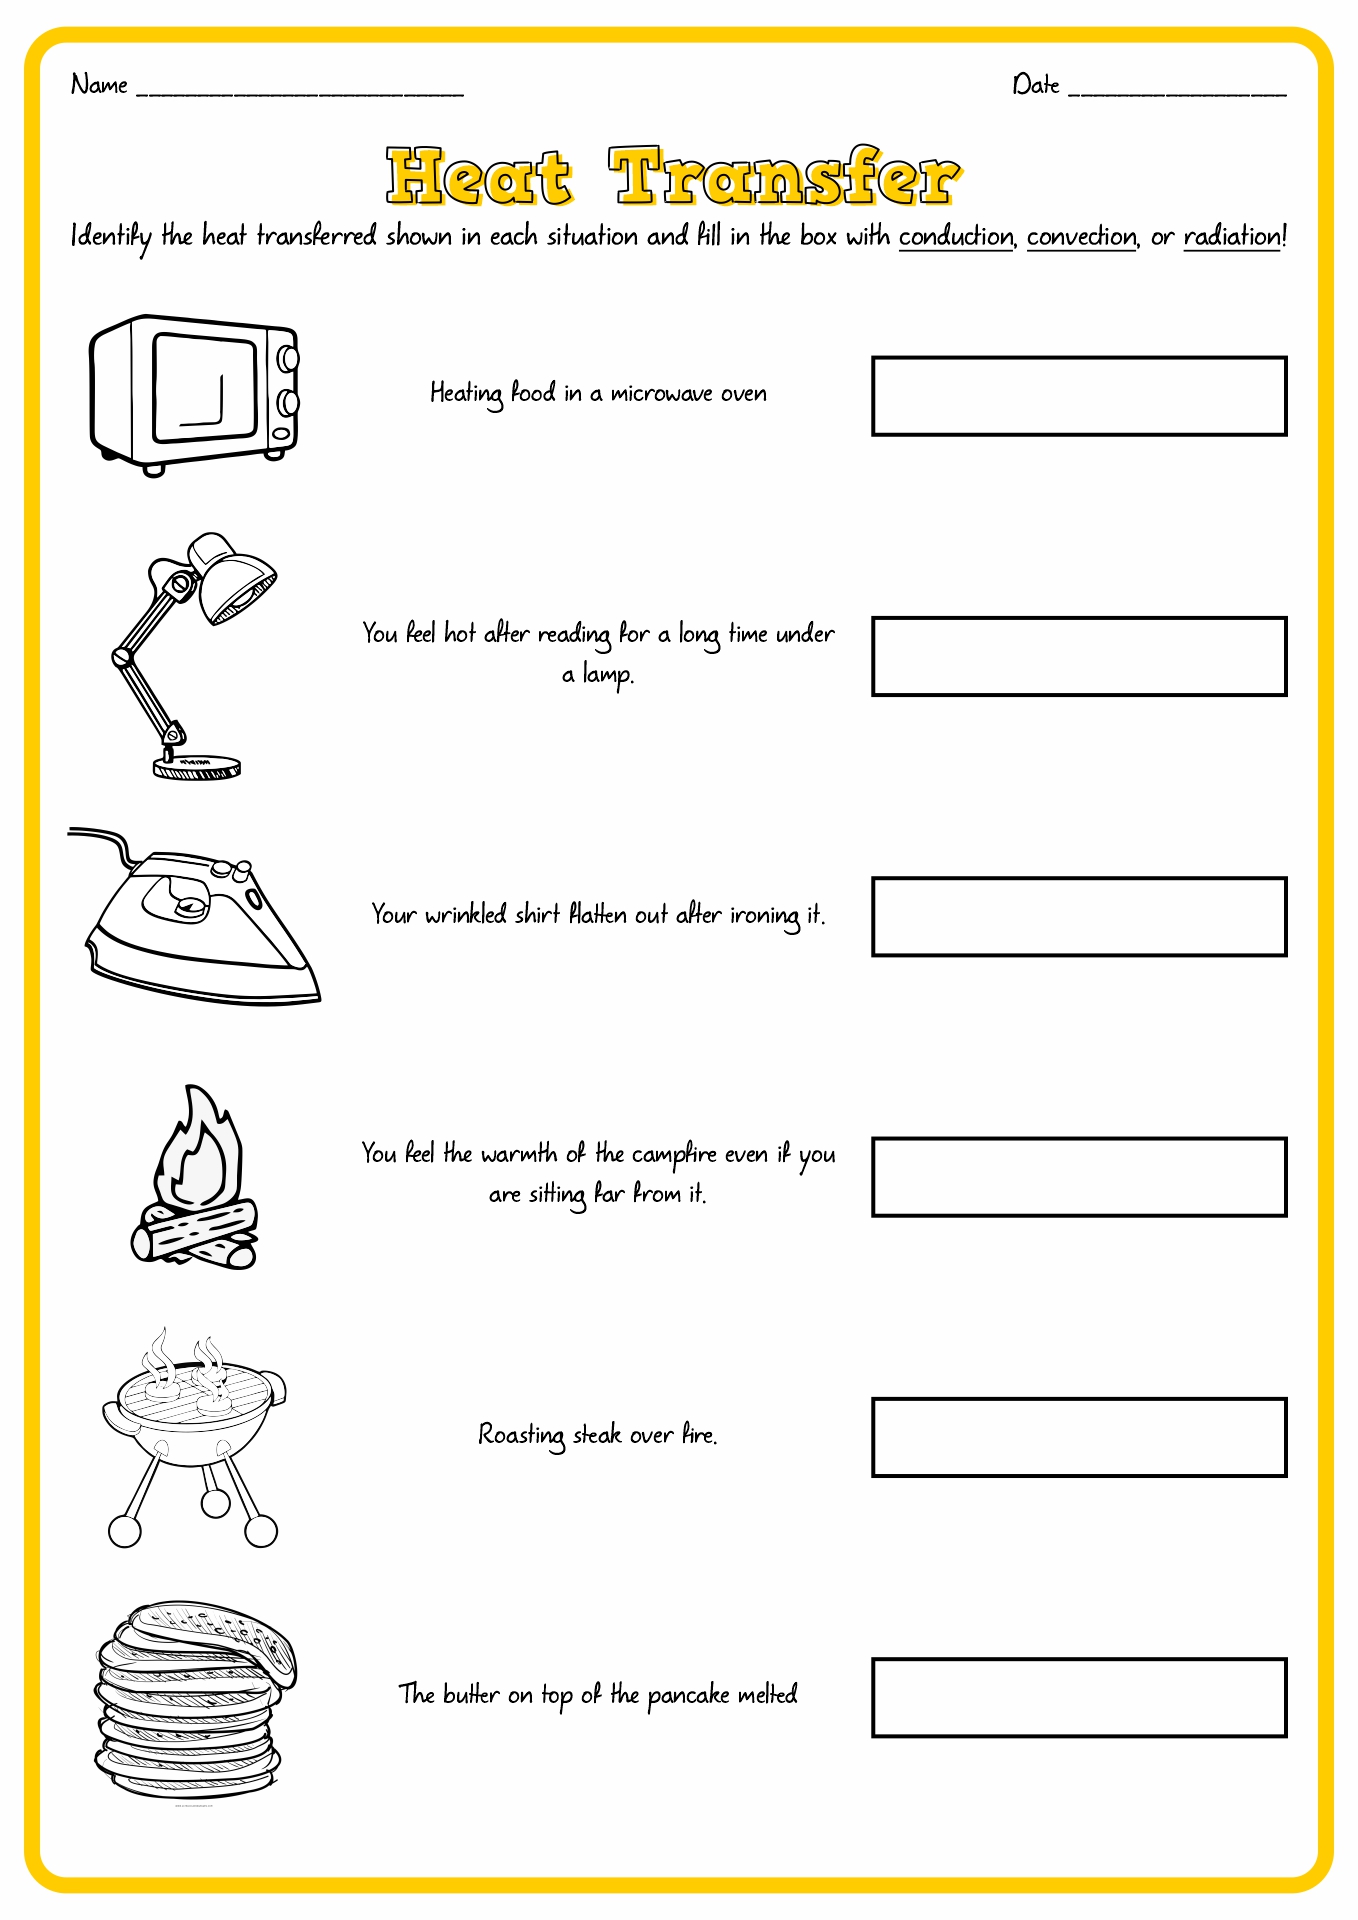 10-best-images-of-light-and-heat-energy-worksheets-kindergarten-energy-worksheets-heat-energy